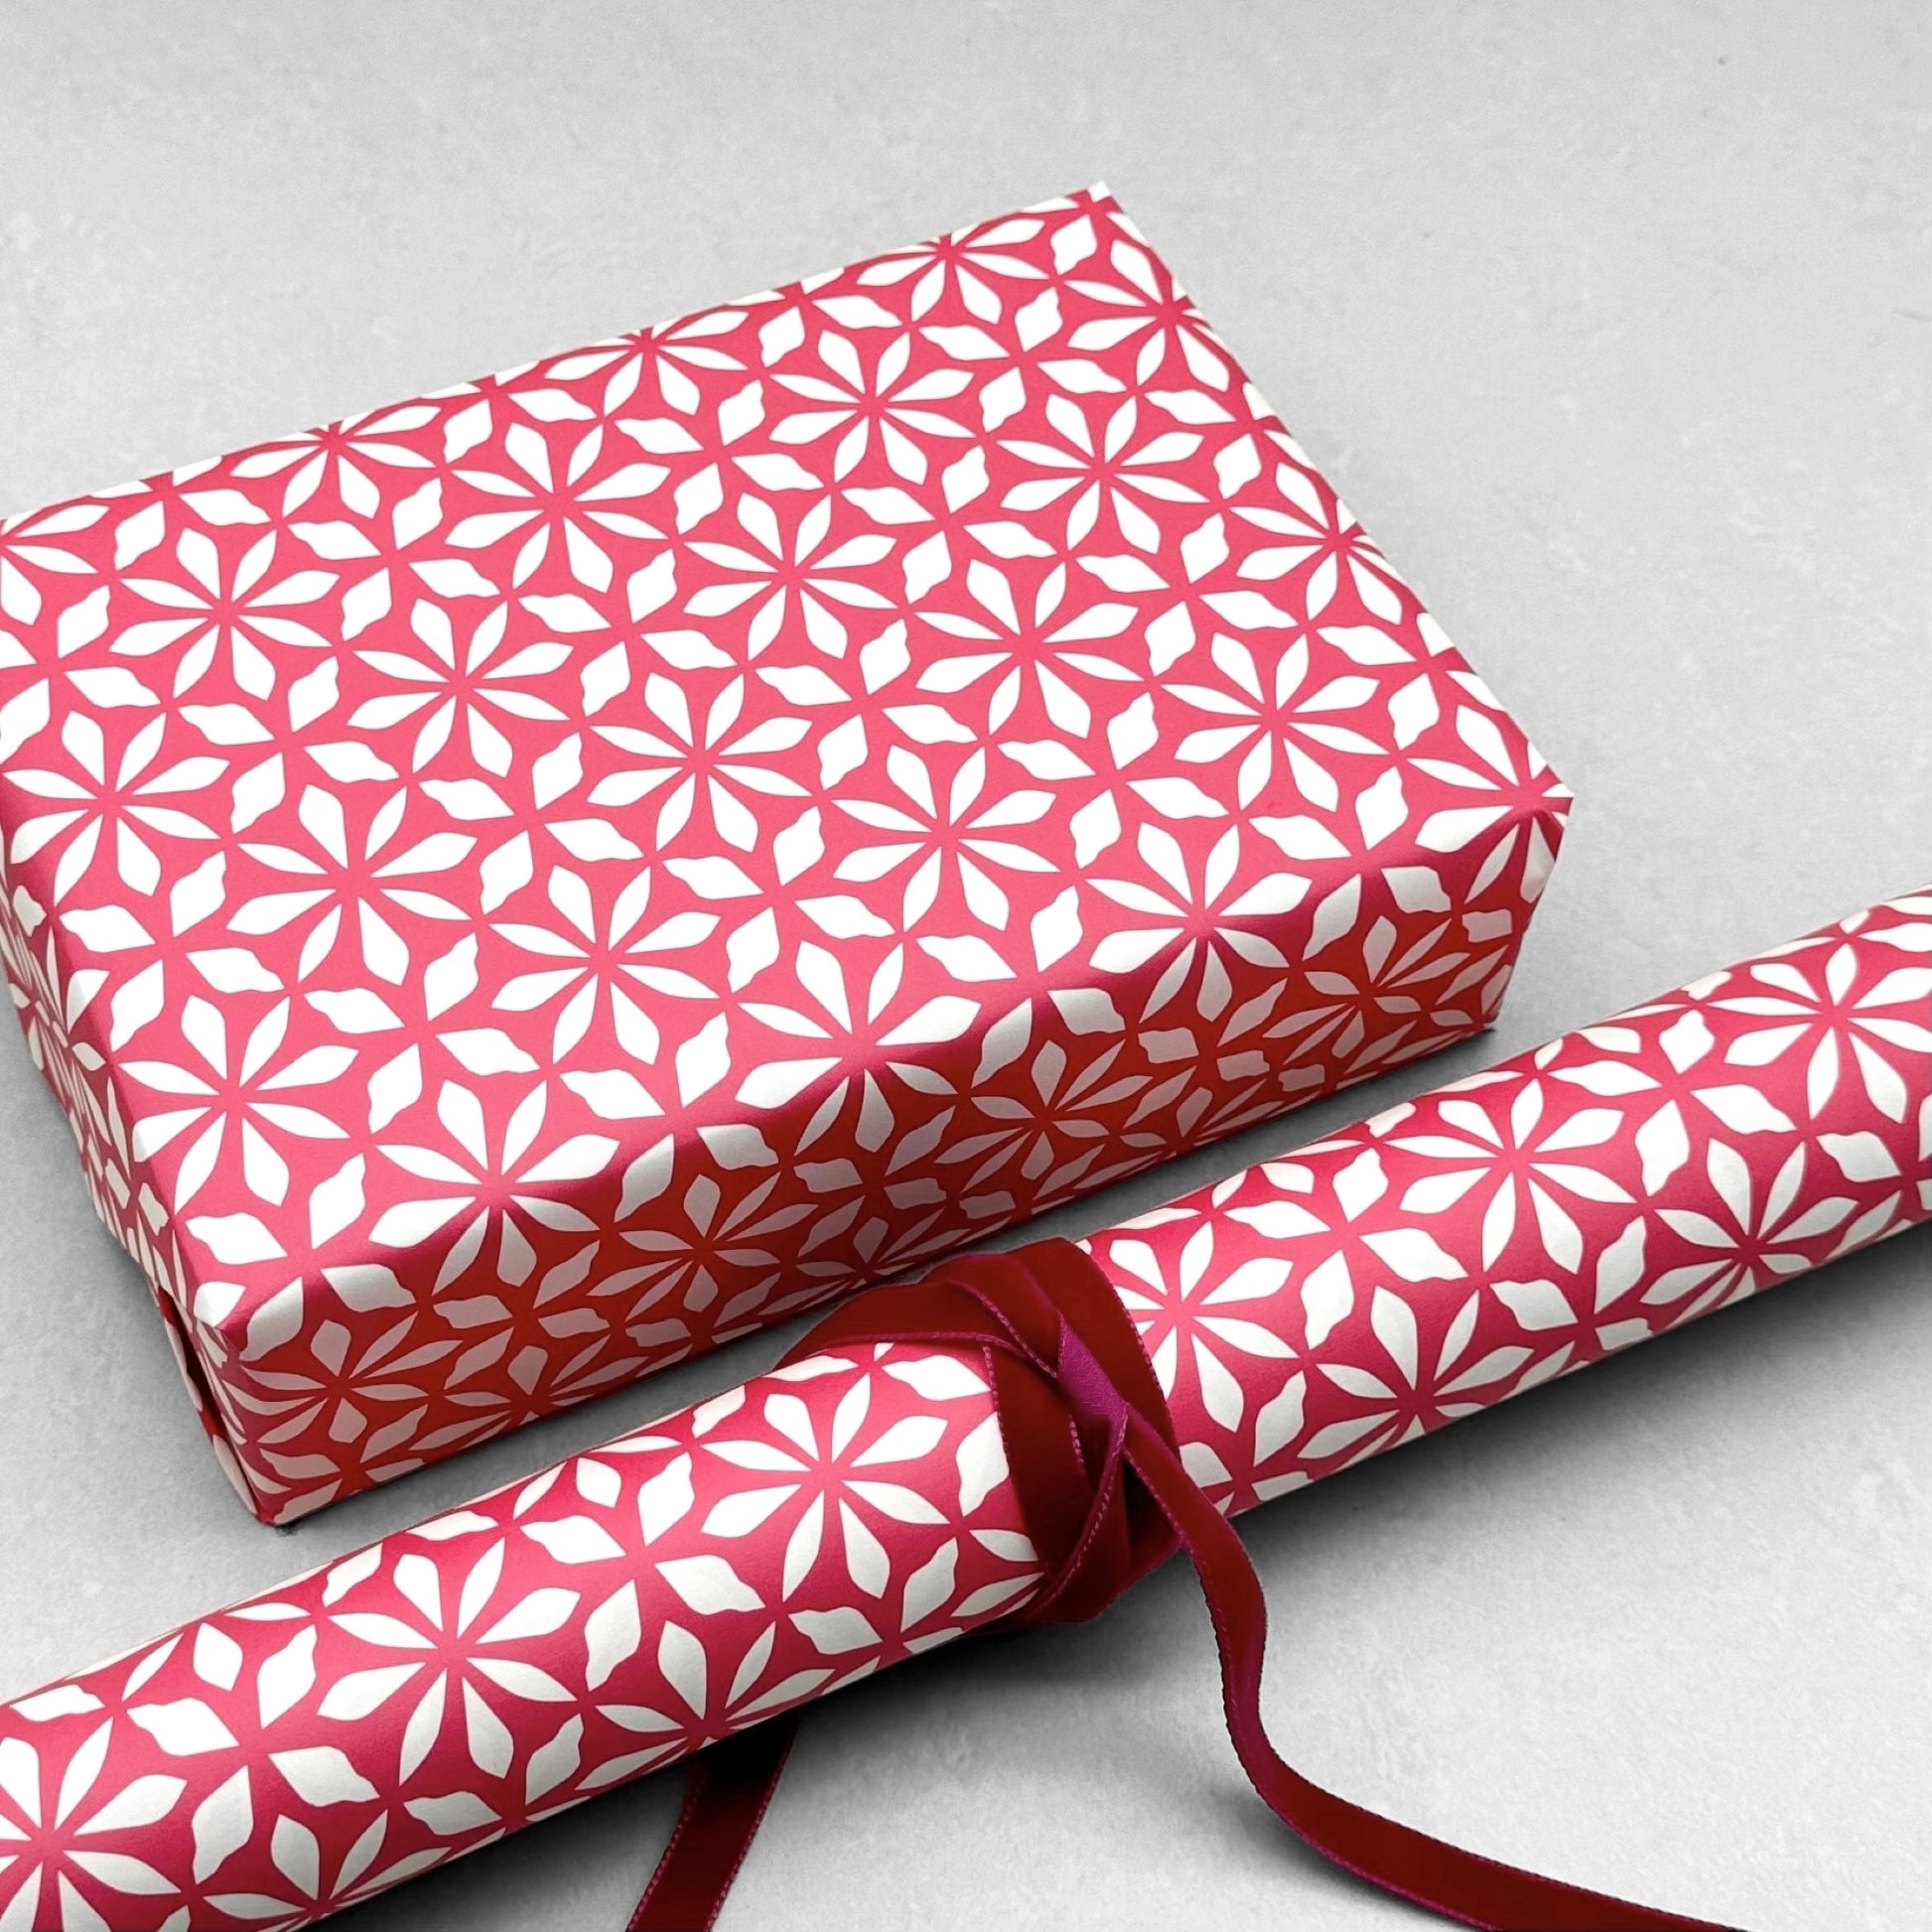 wrapping paper by Otto Editions with a cut-out flower design in white on a magenta pink background. Pictured wrapped as a present with a roll of the paper